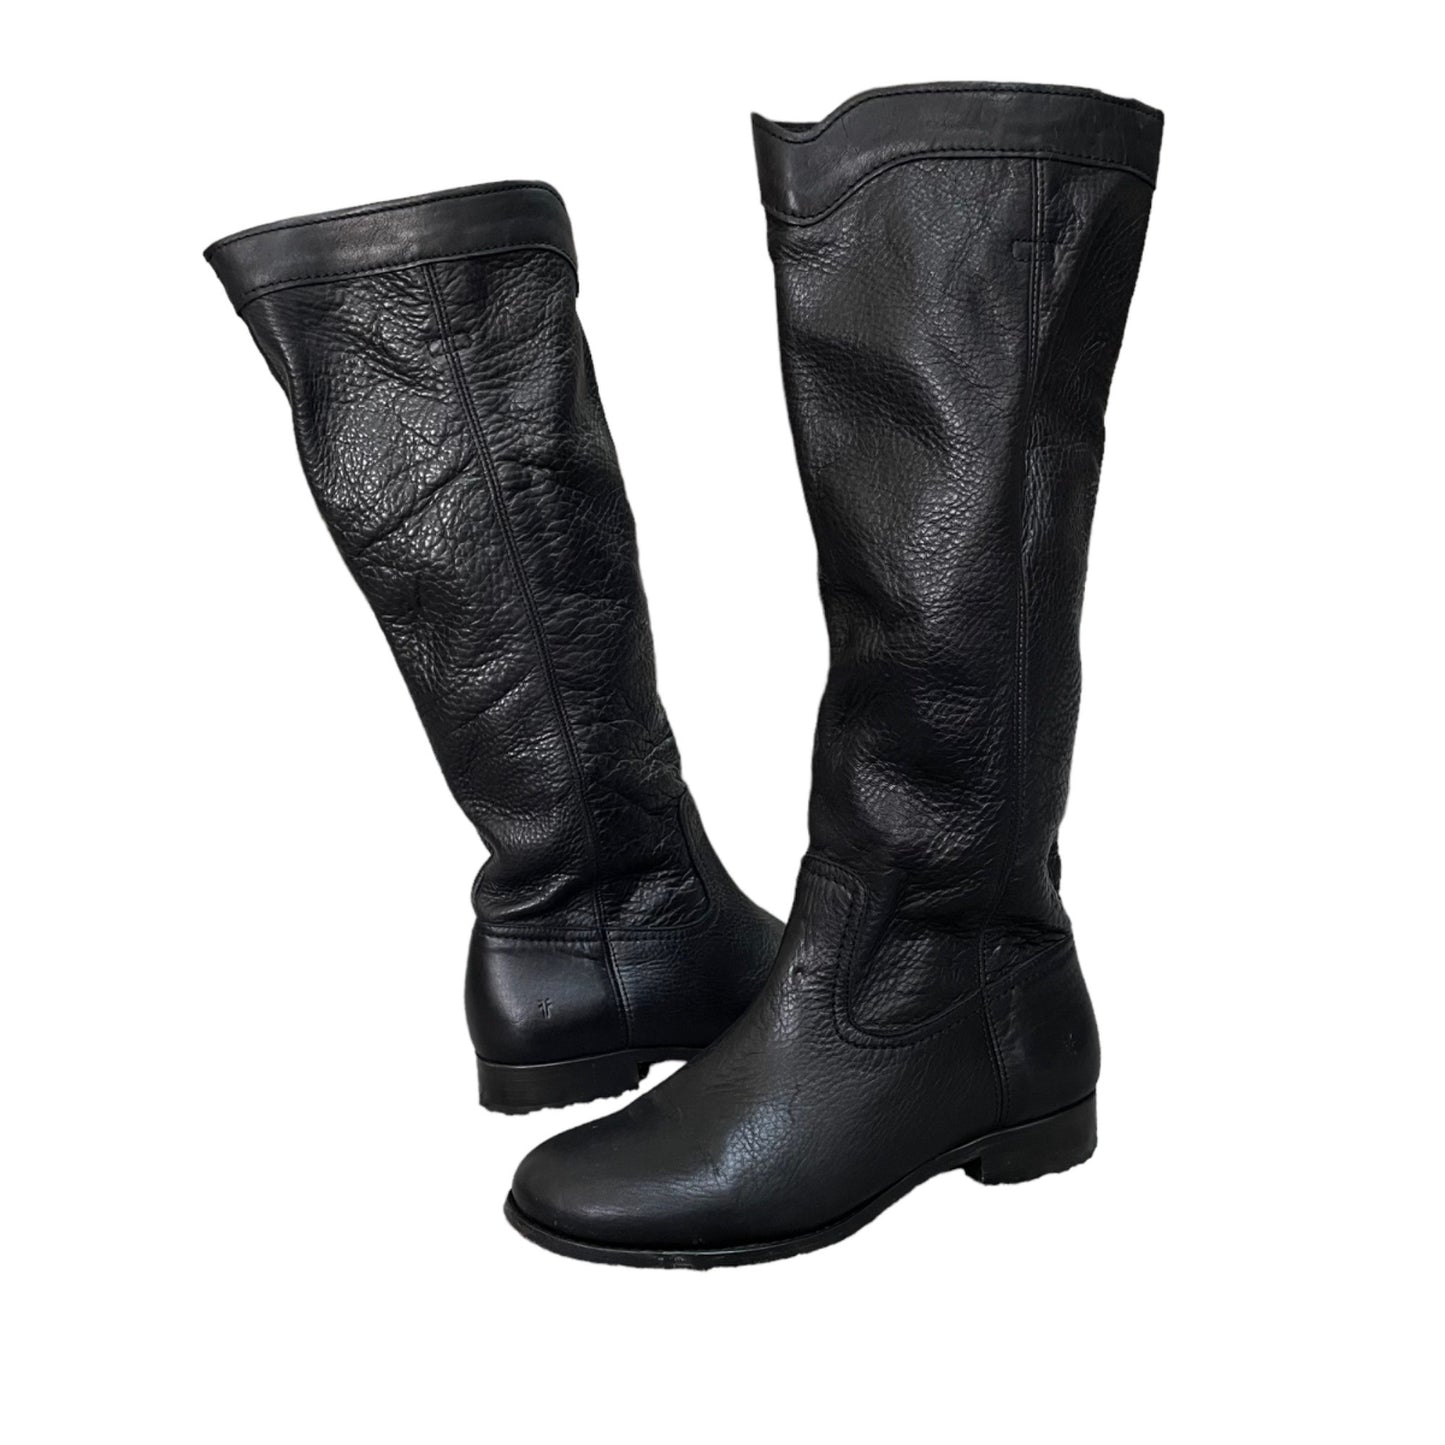 Frye Black Cora Roper Pebbled Leather Pull On Knee High Boots Women's Size 8